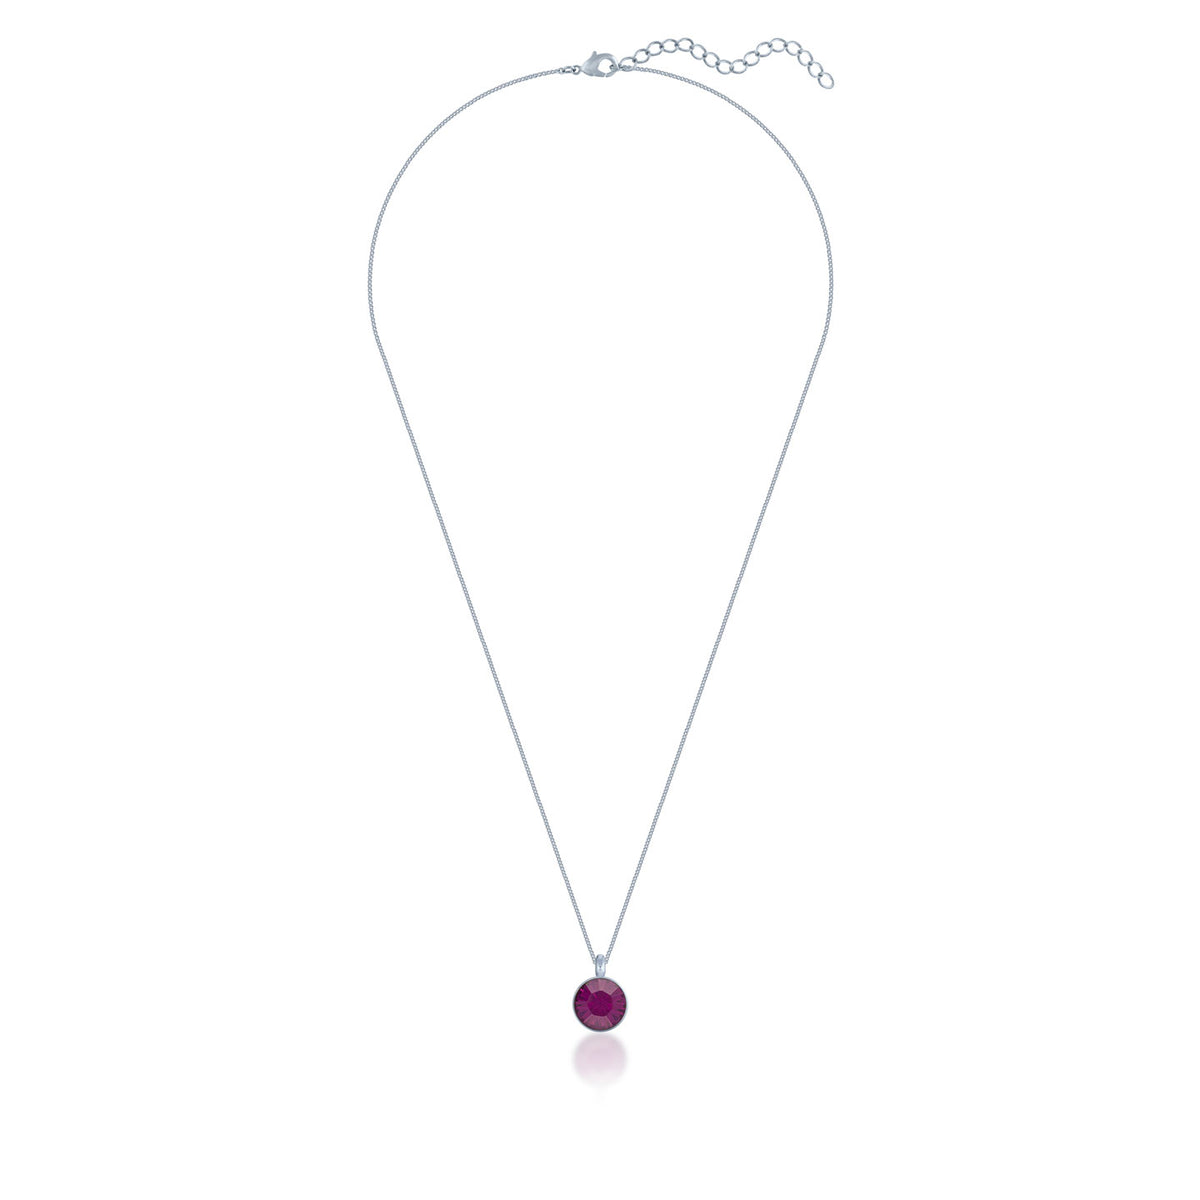 Bella Pendant Necklace with Purple Amethyst Round Crystals from Swarovski Silver Toned Rhodium Plated - Ed Heart